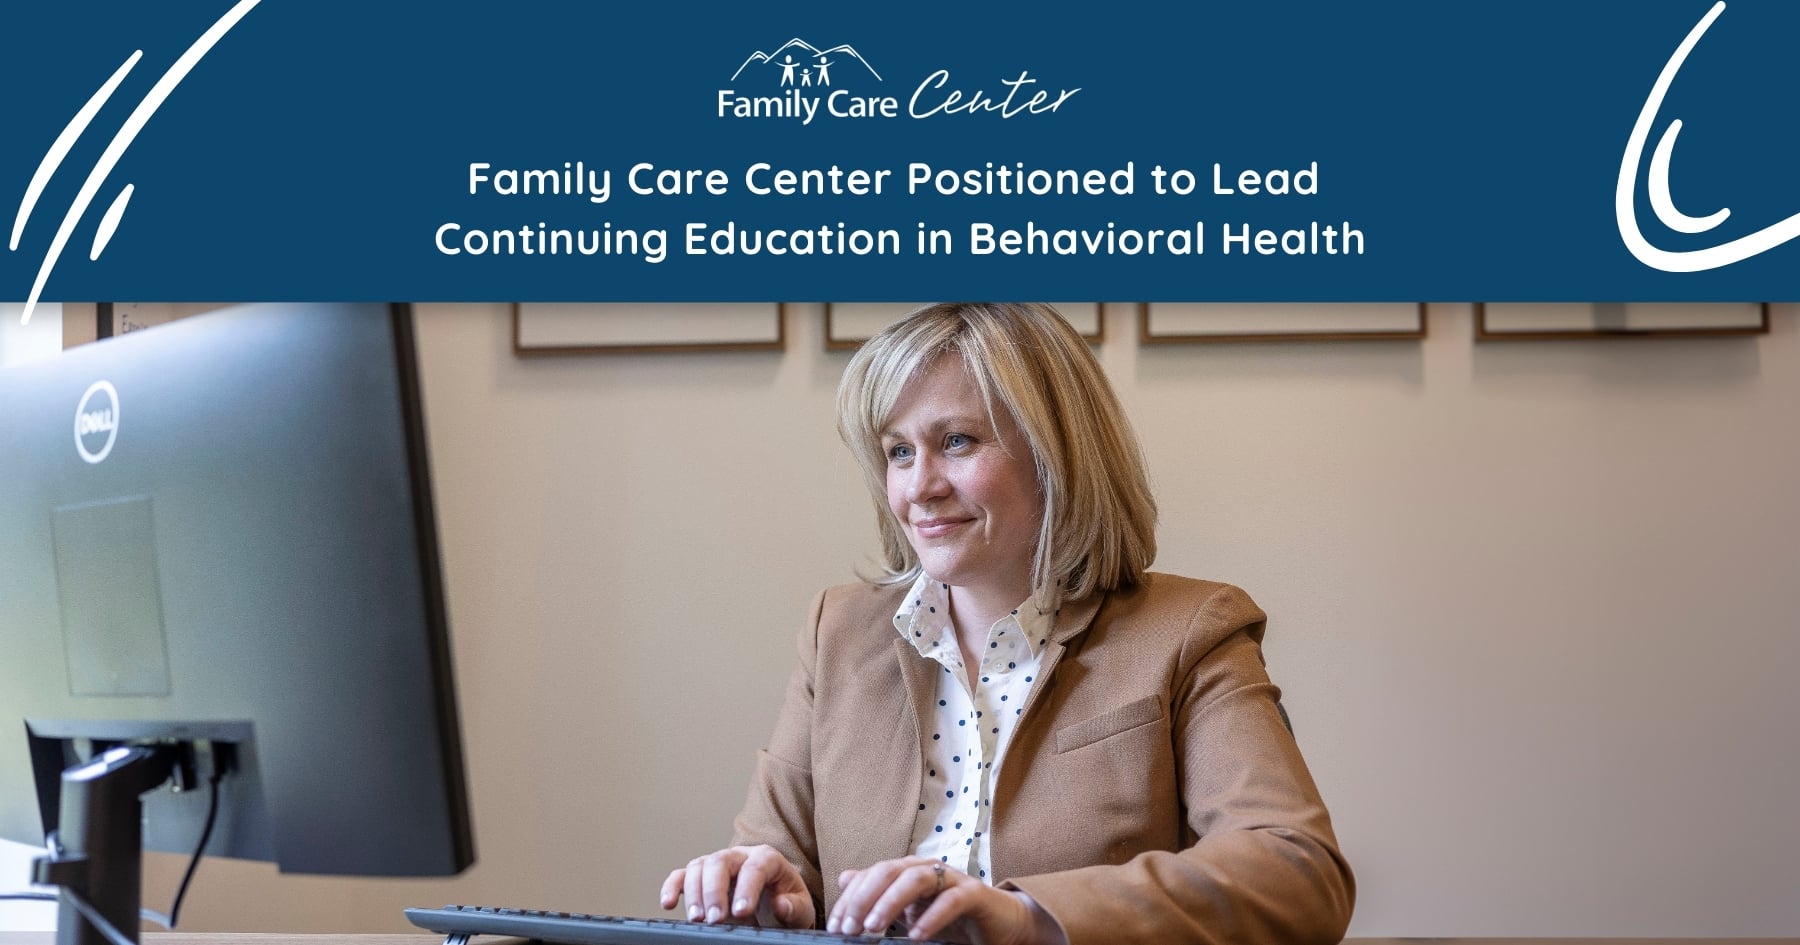 Mental health provider completing continuing education CMEs at Family Care Center.